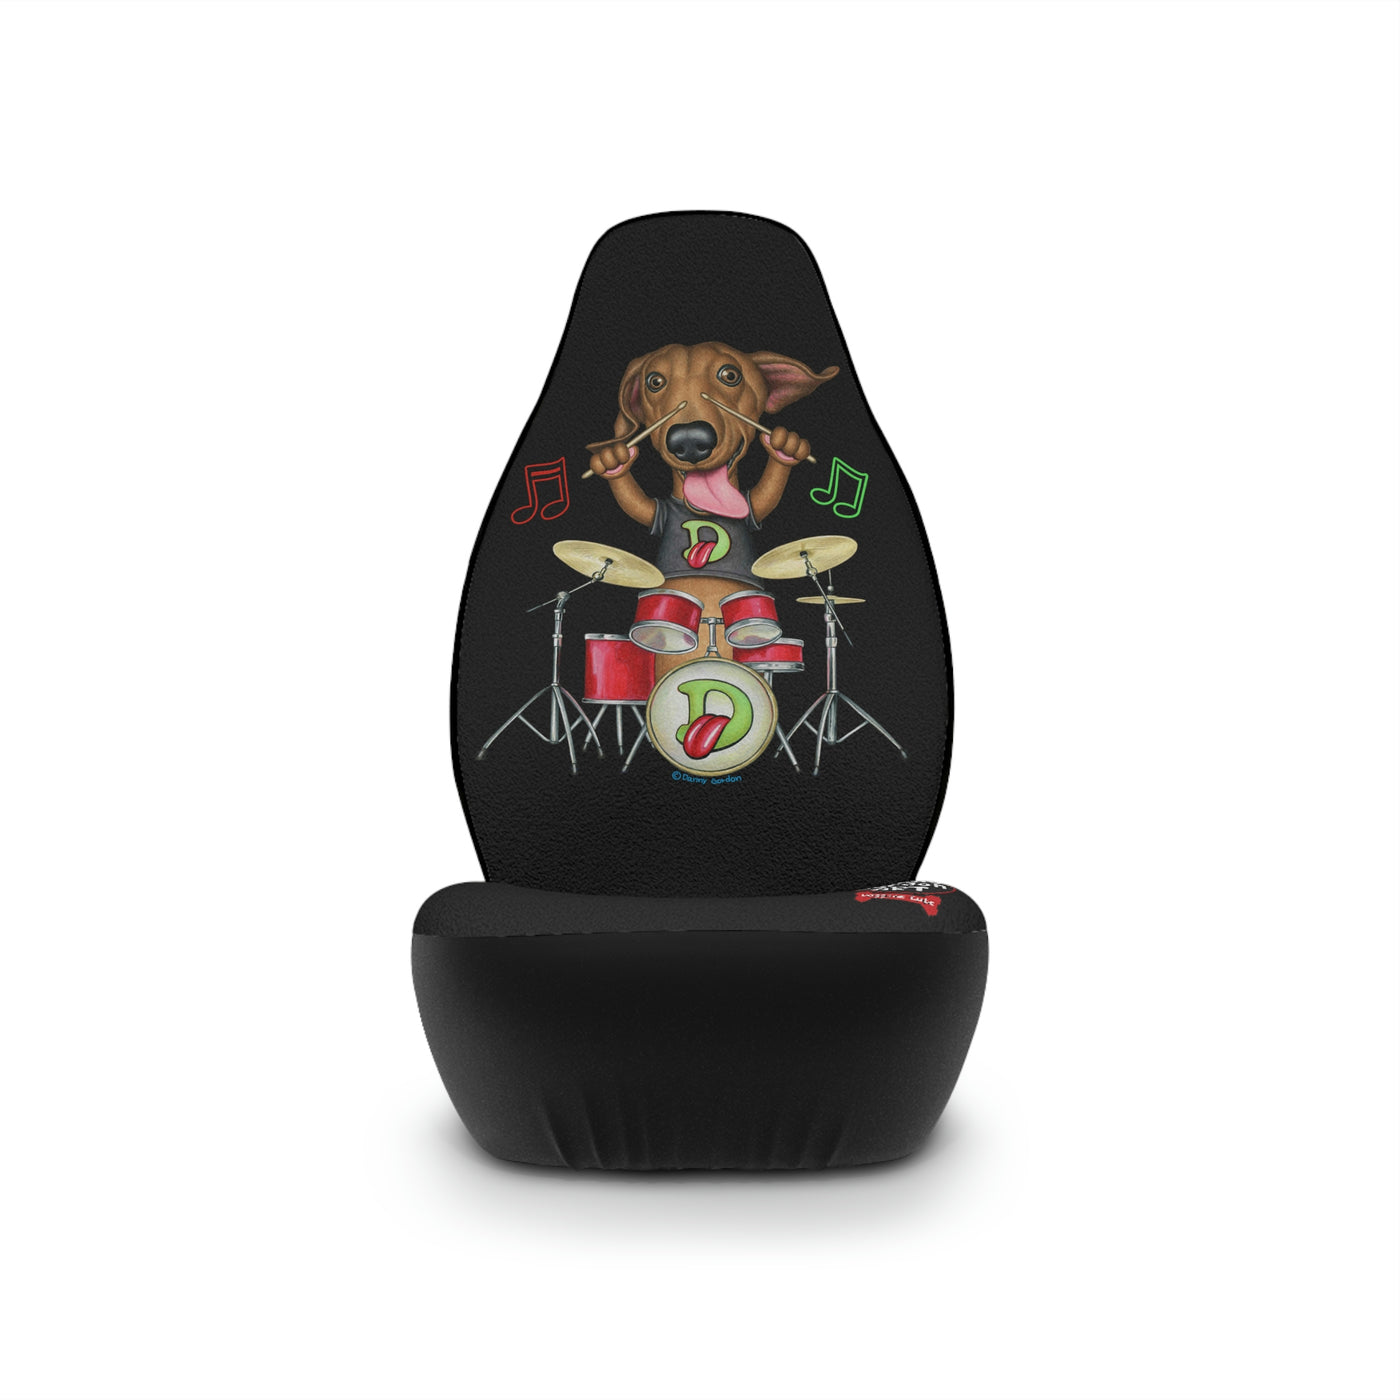 Cute Doxie Dog playing drums on Dachshund Car Seat Covers